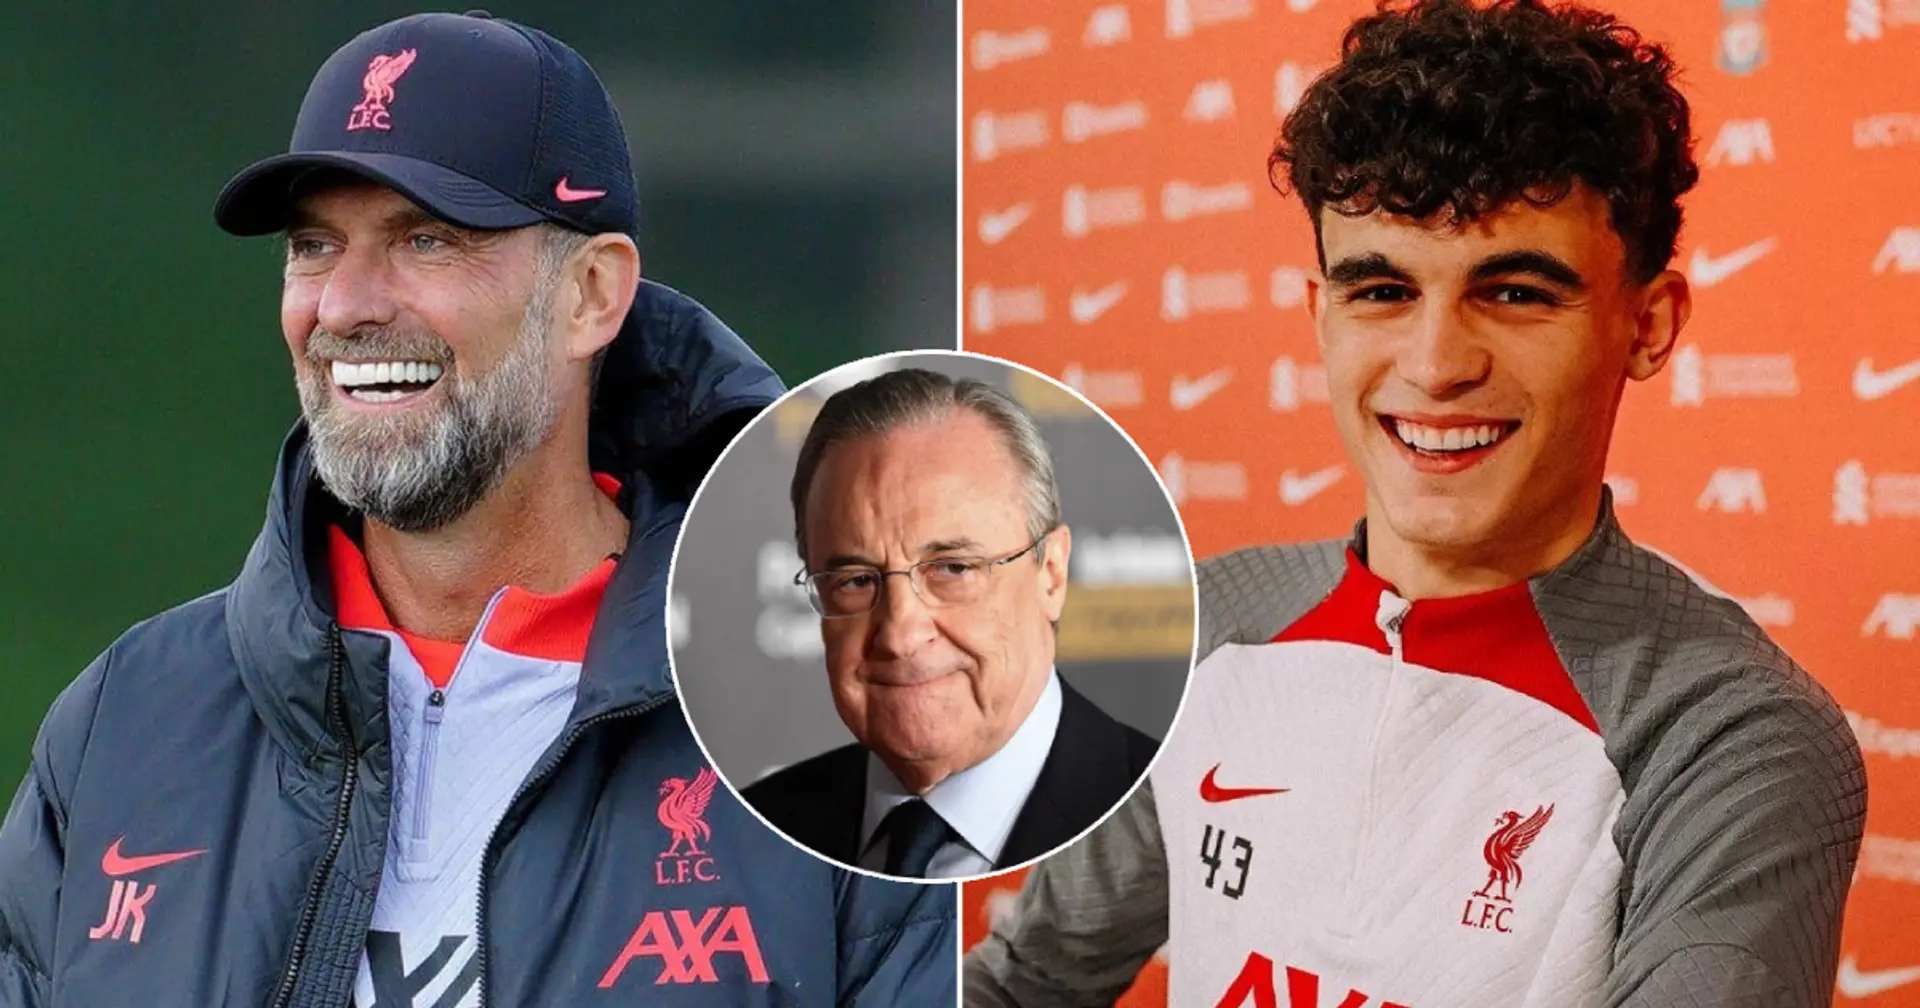 'They went crazy': Celta academy chief reveals how Liverpool beat Man United and Real Madrid to sign Bajcetic in 2020